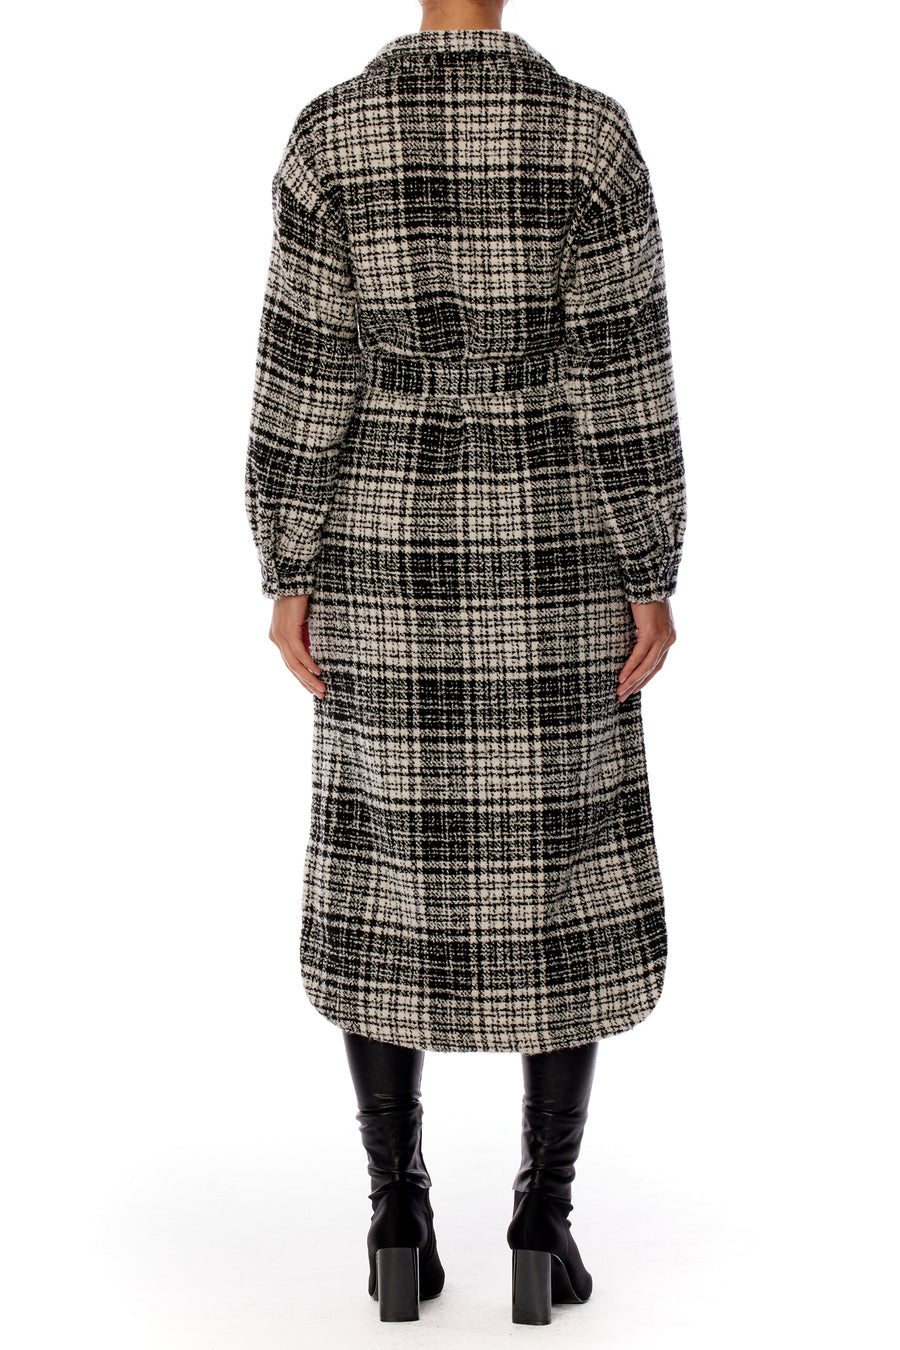 midi length, button up black and white plaid jacket with shirttail hem and waist tie